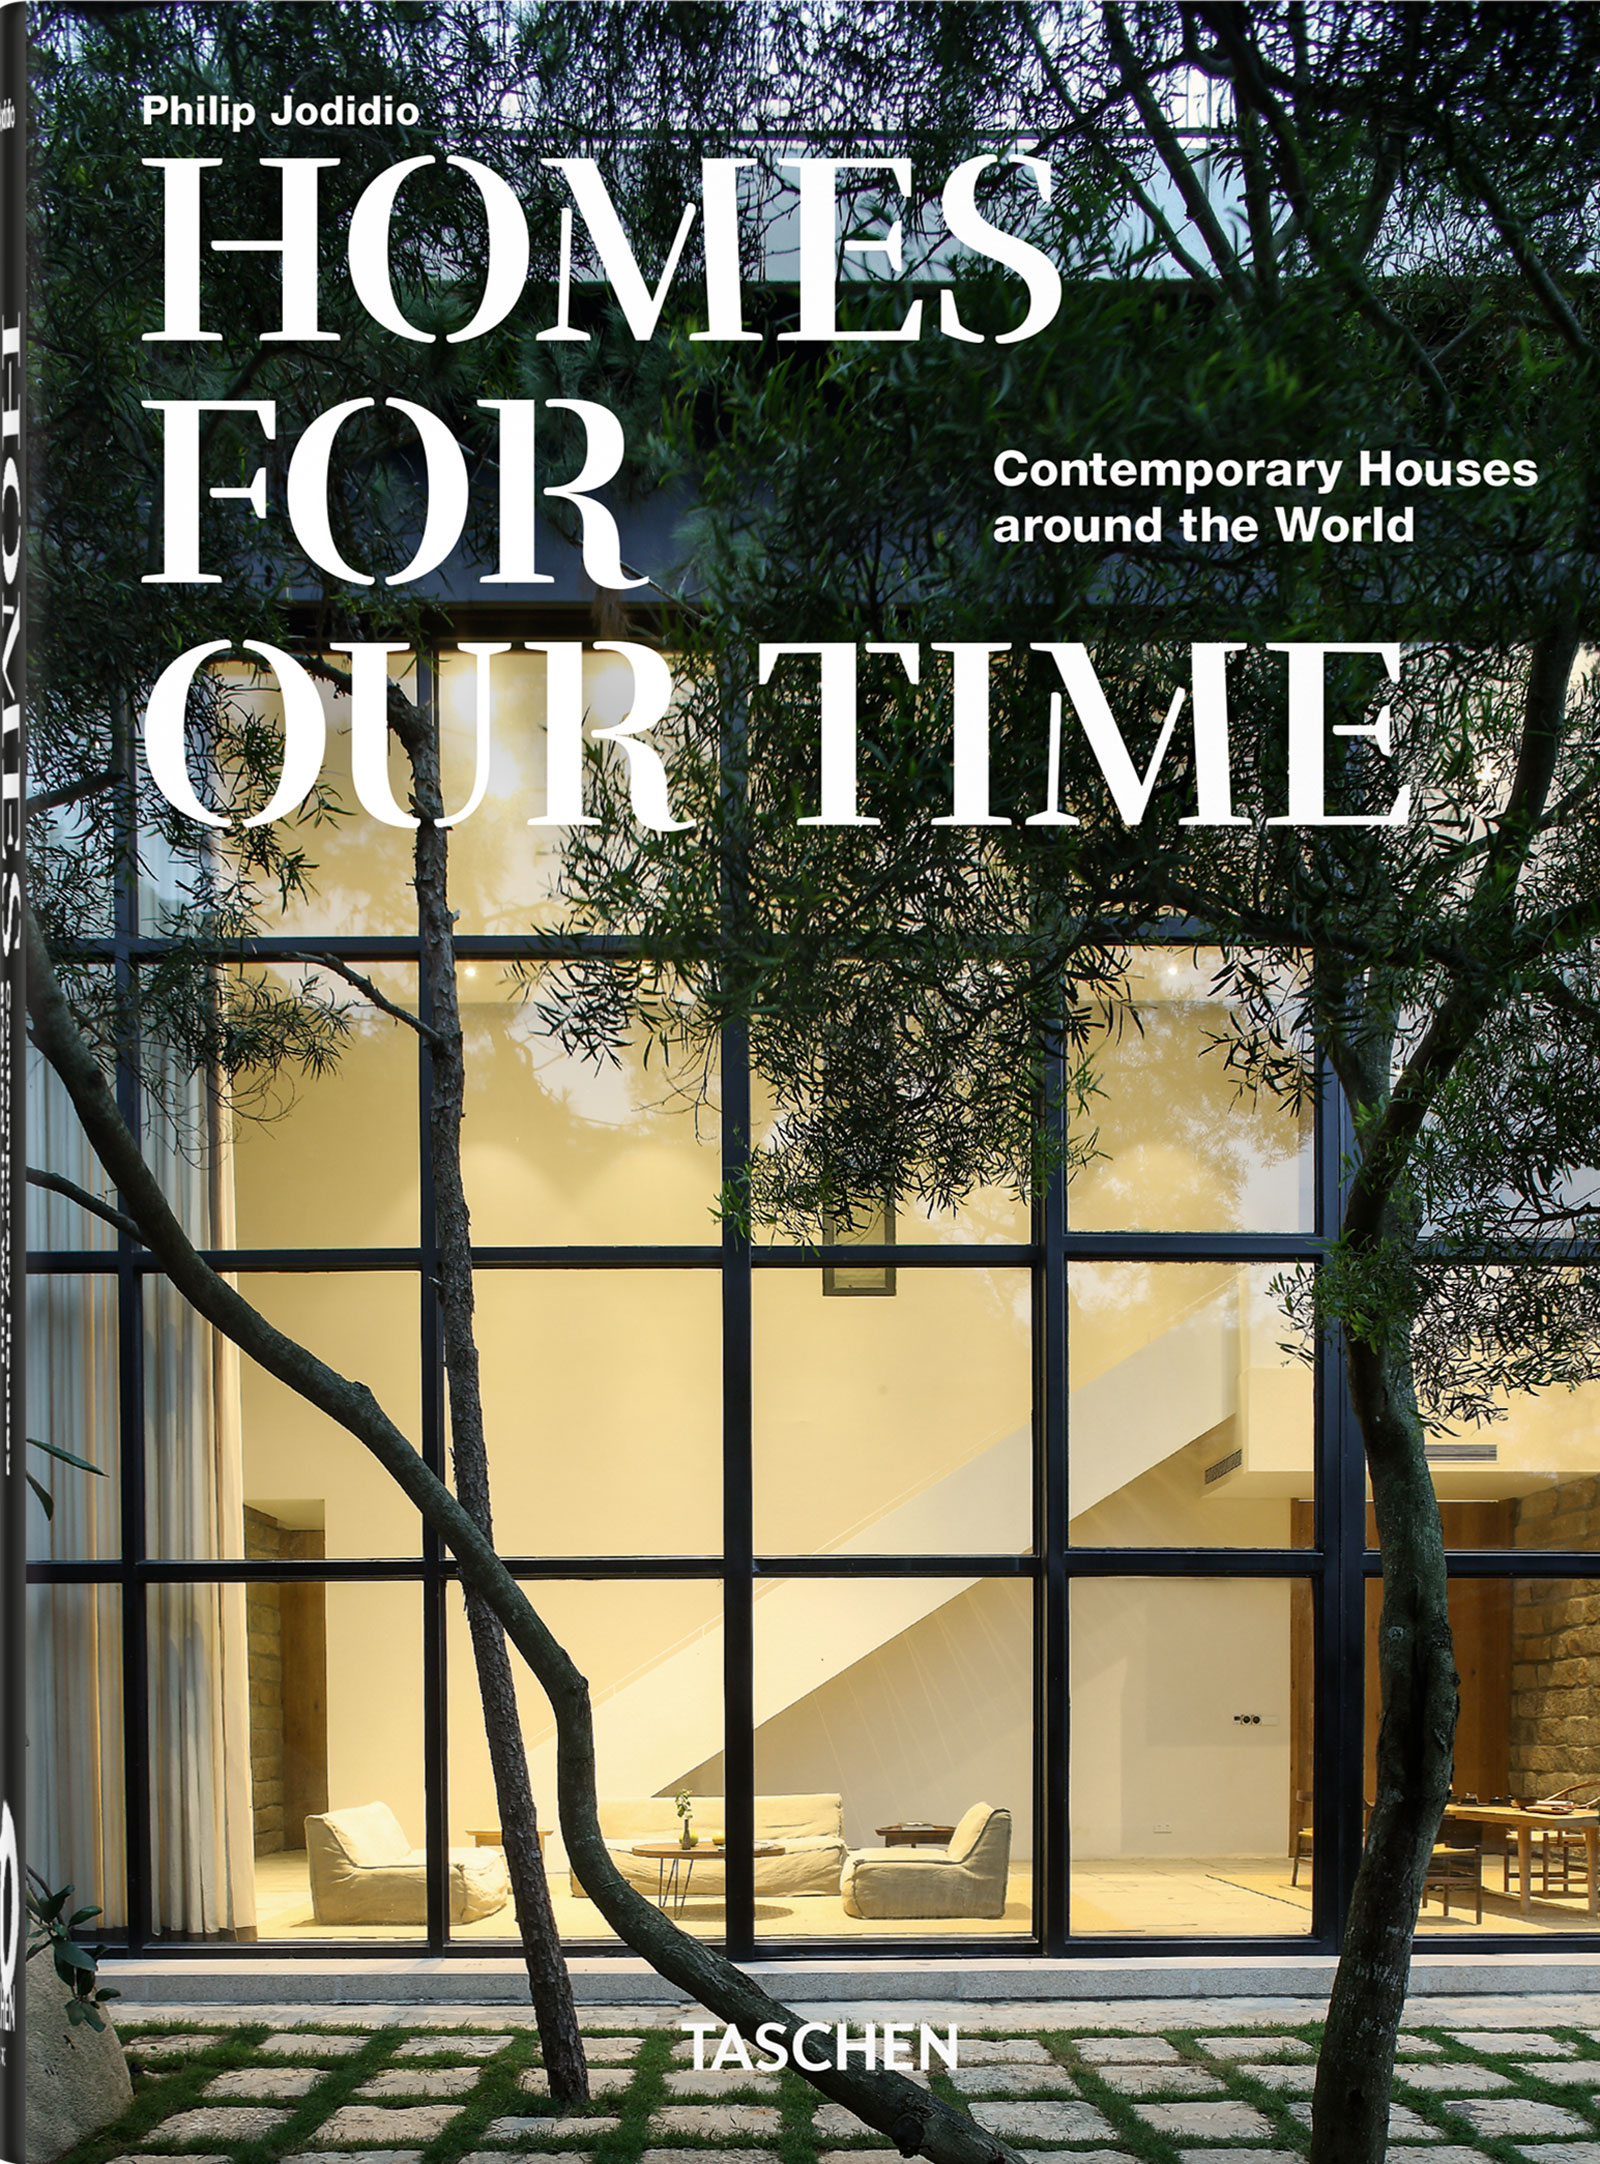 Homes For Our Time. Contemporary Houses around the World – 40 Years